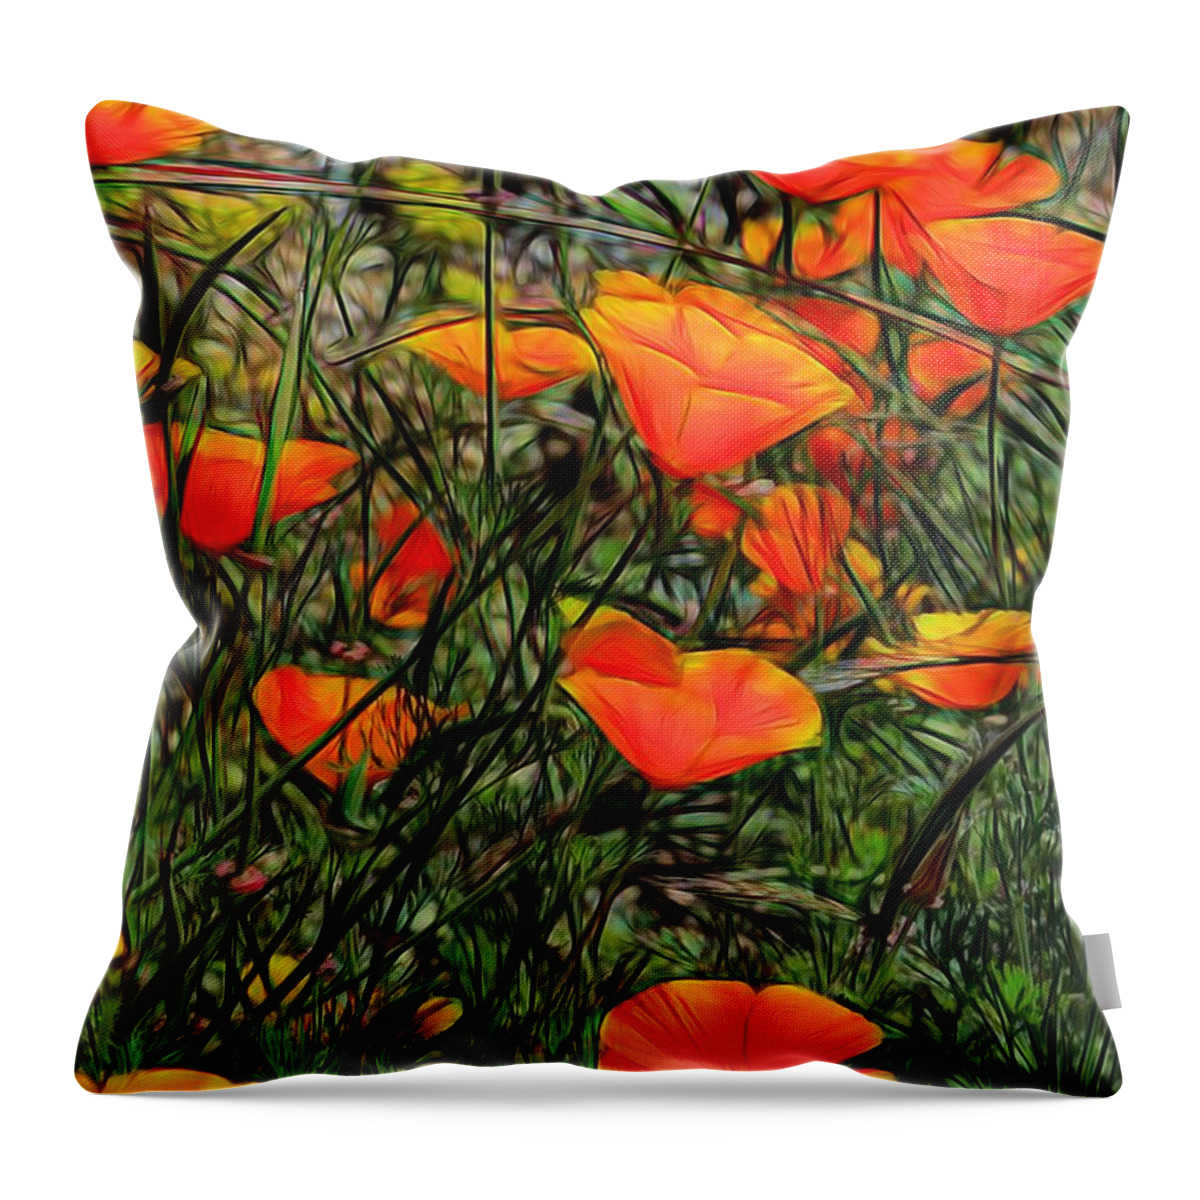 Orange Throw Pillow featuring the painting Impressions of Orange by Jon Volden